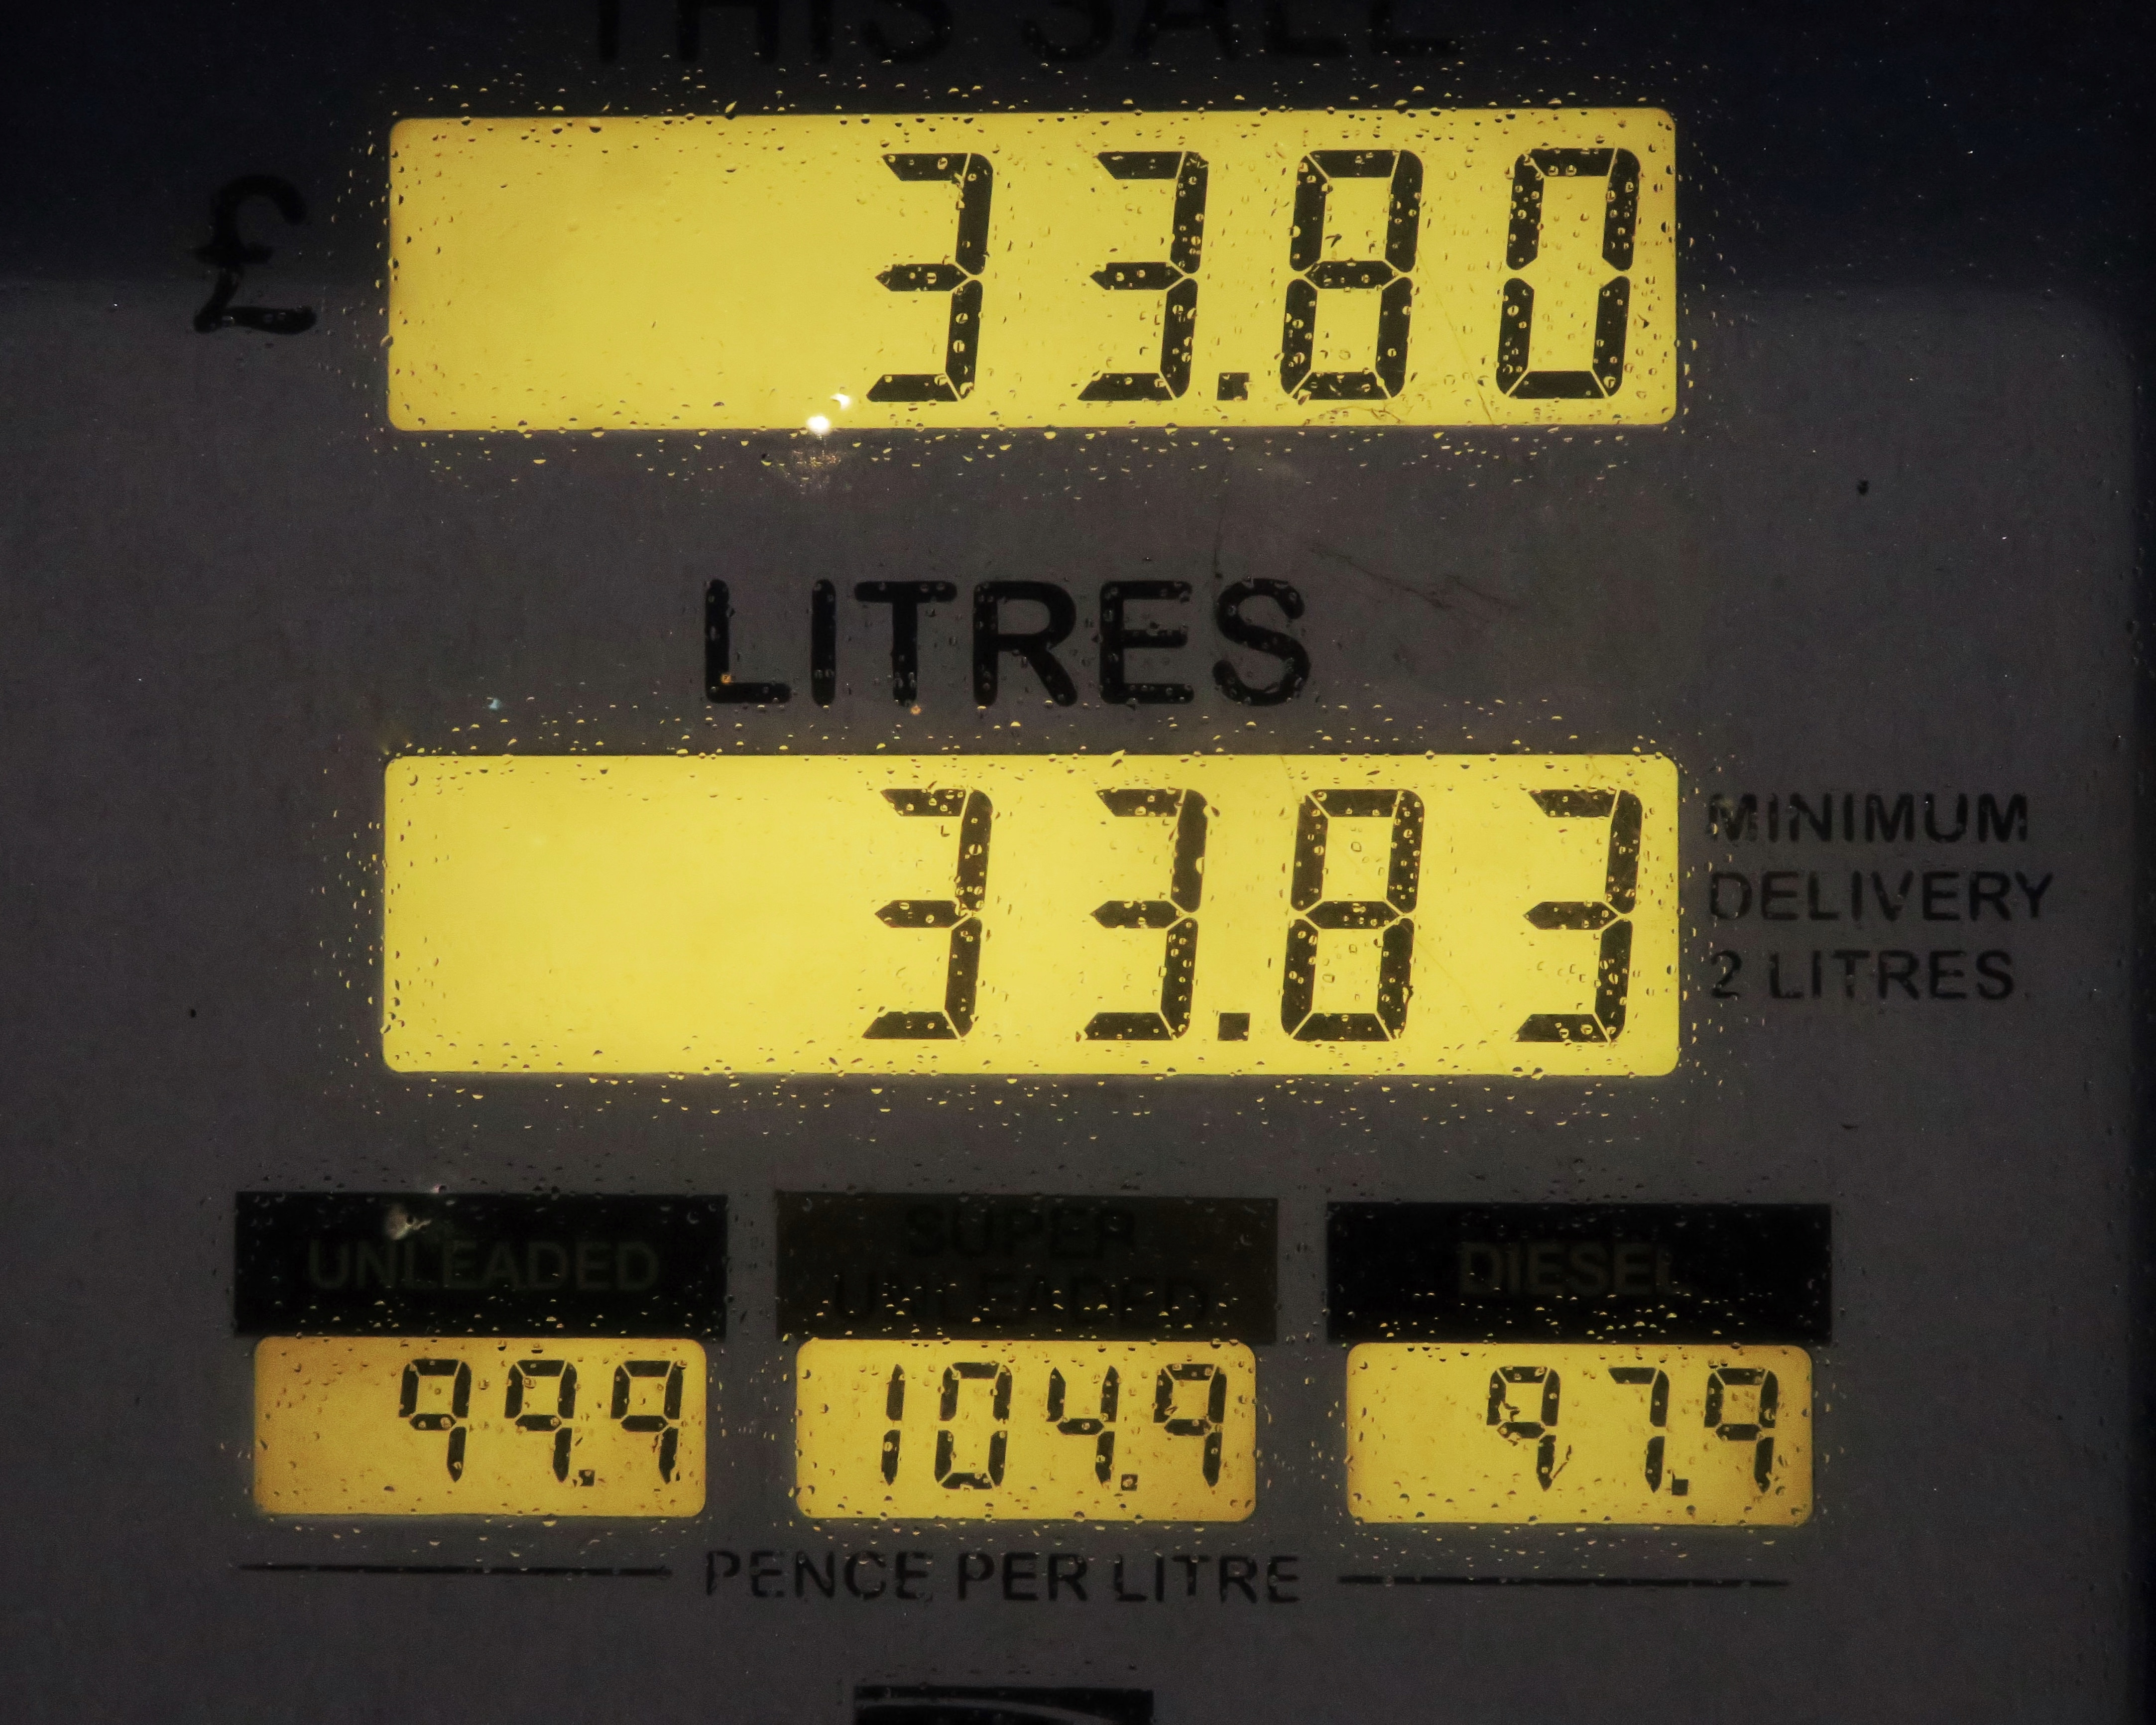 black gasoline station monitor at 33.80 and 33.83 litter 99.9 104.9 97.9 pence per litre